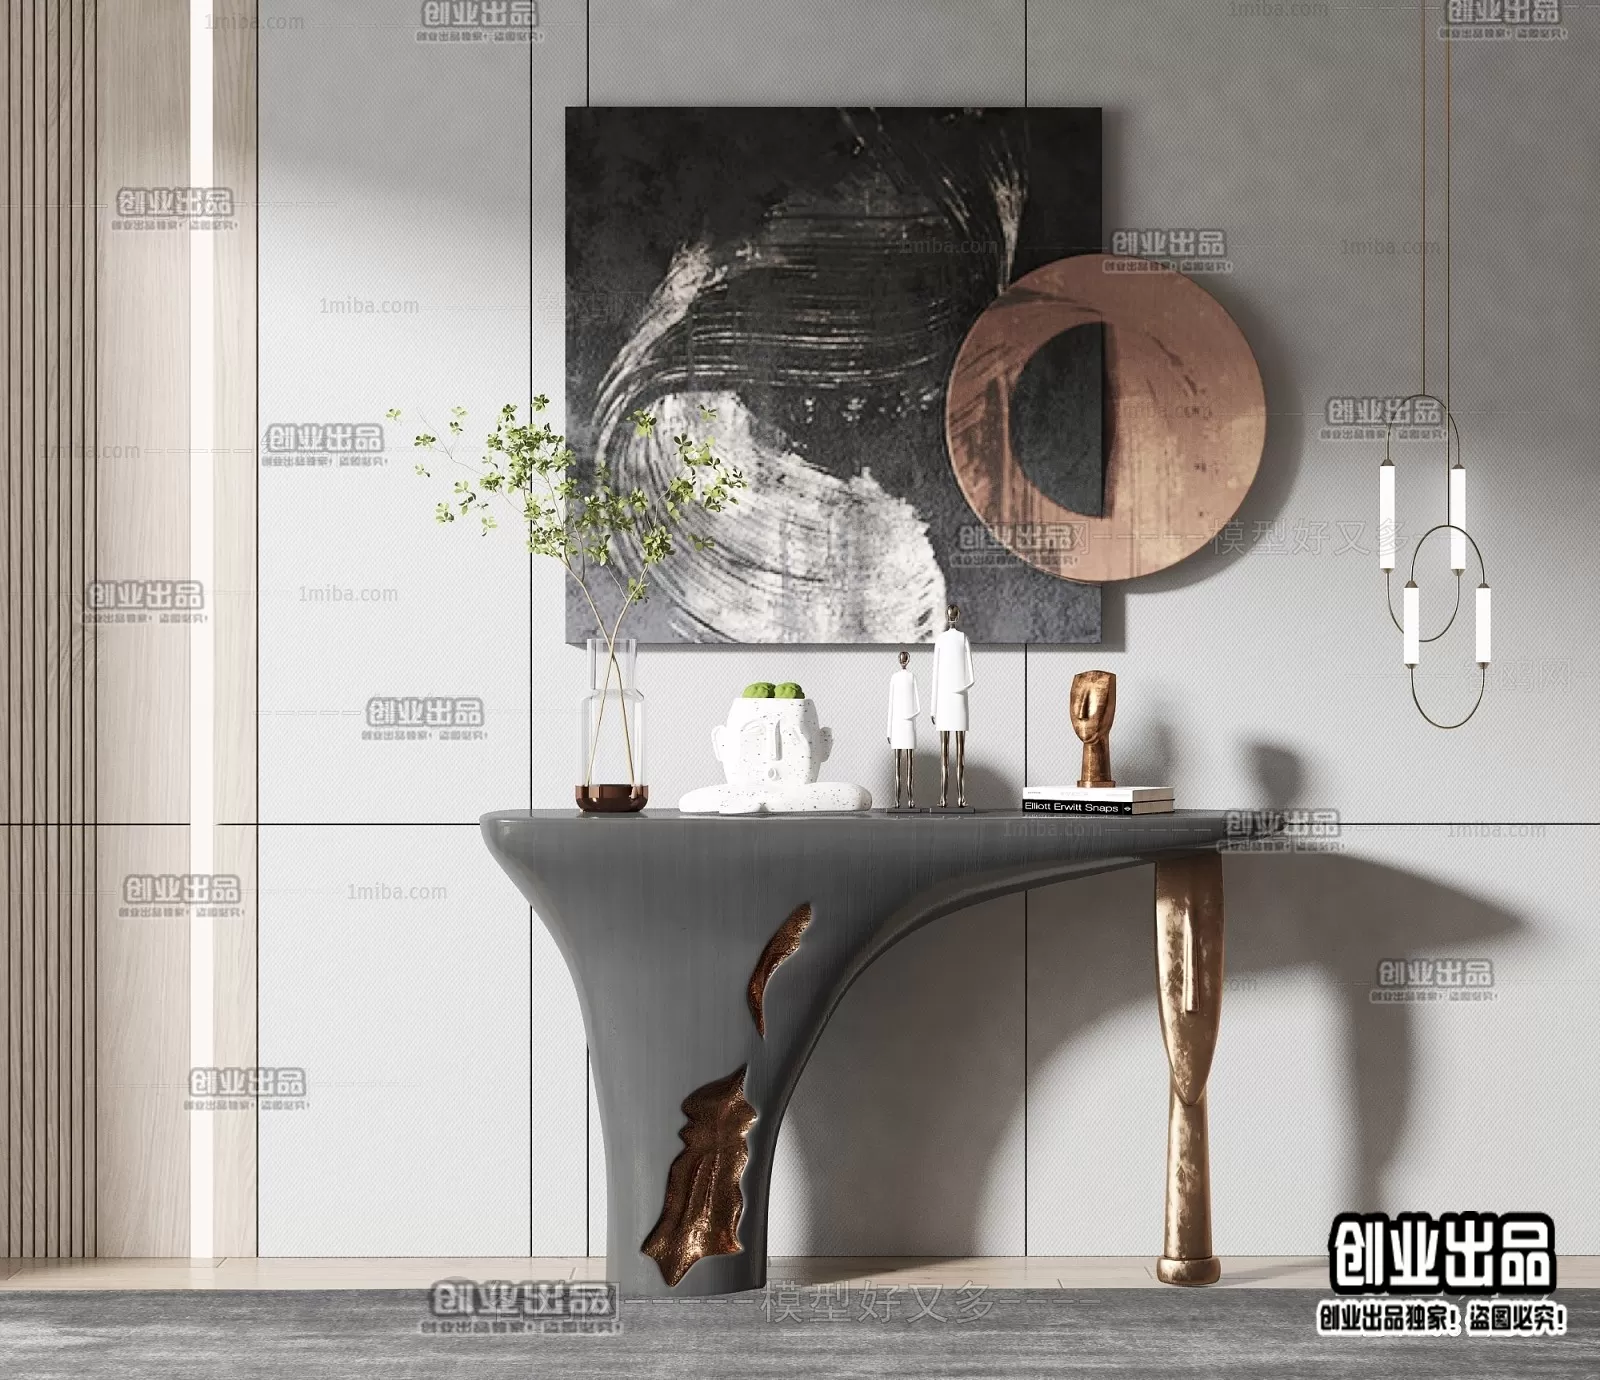 CONSOLE TABLE – 22 – FURNITURE 3D MODELS 2022 (VRAY)